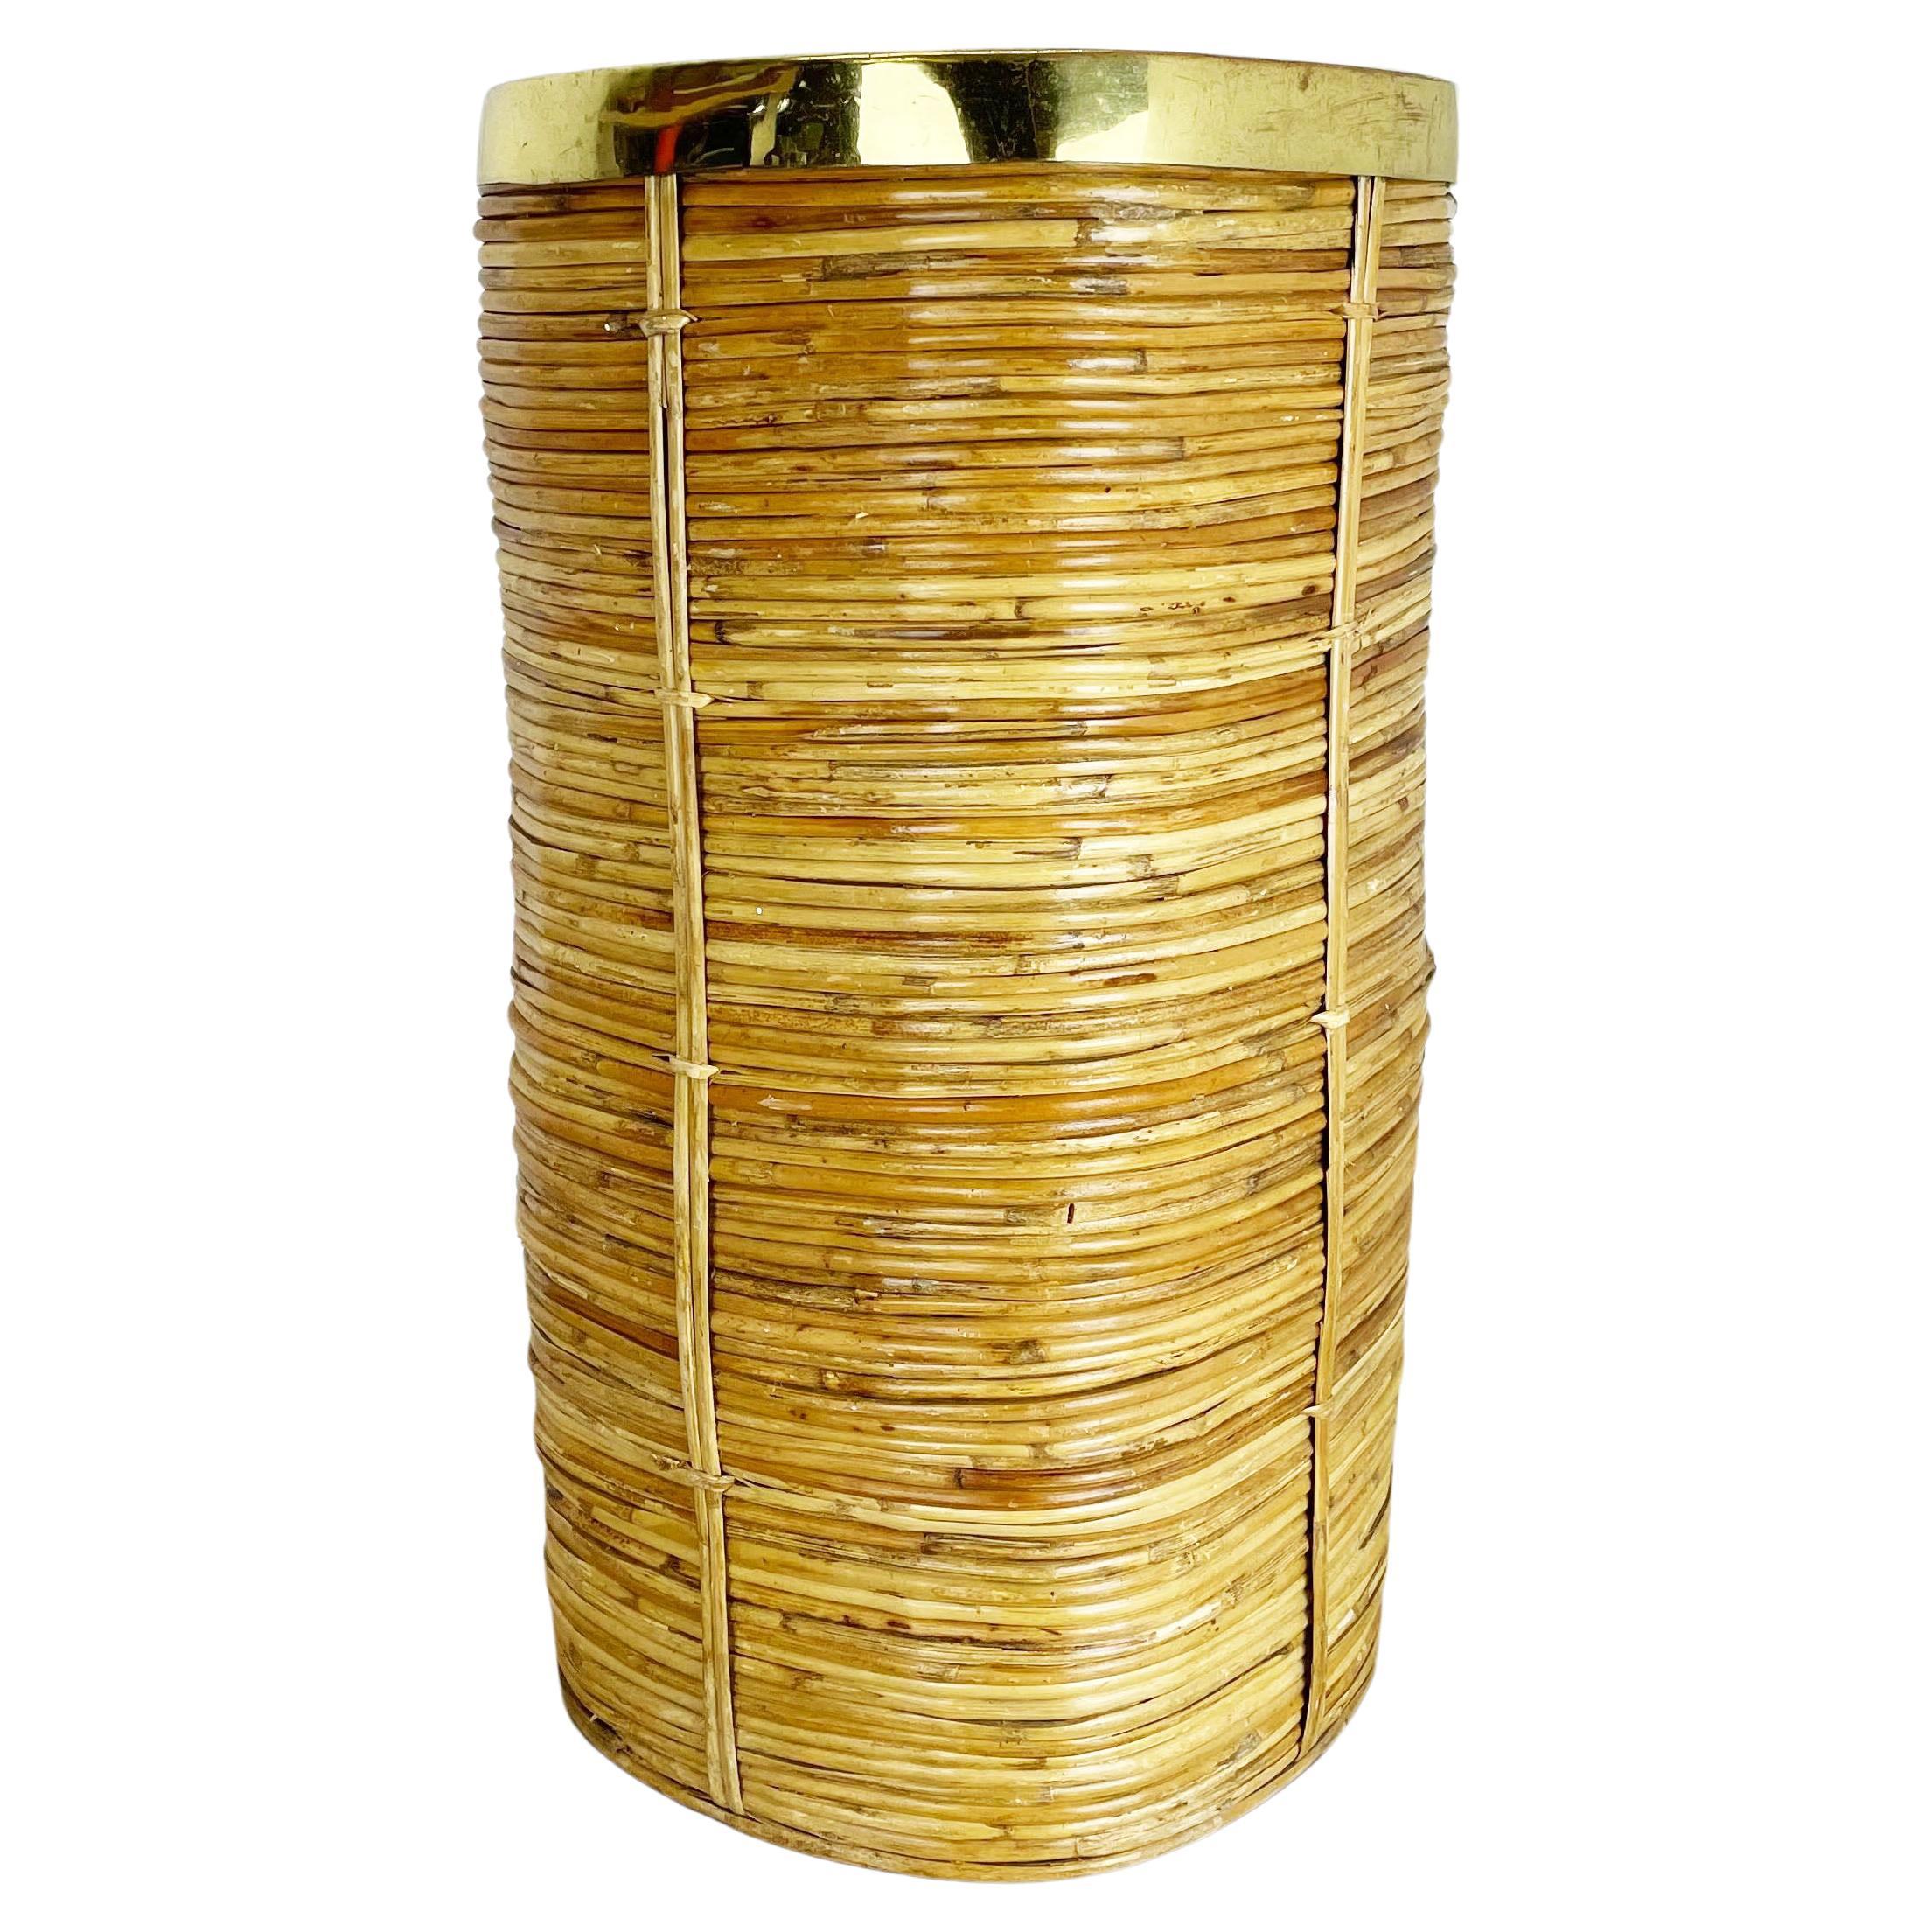 Aubock Style Mid-Century Rattan and Brass Bauhaus Waste Paper Bin, France, 1960s For Sale